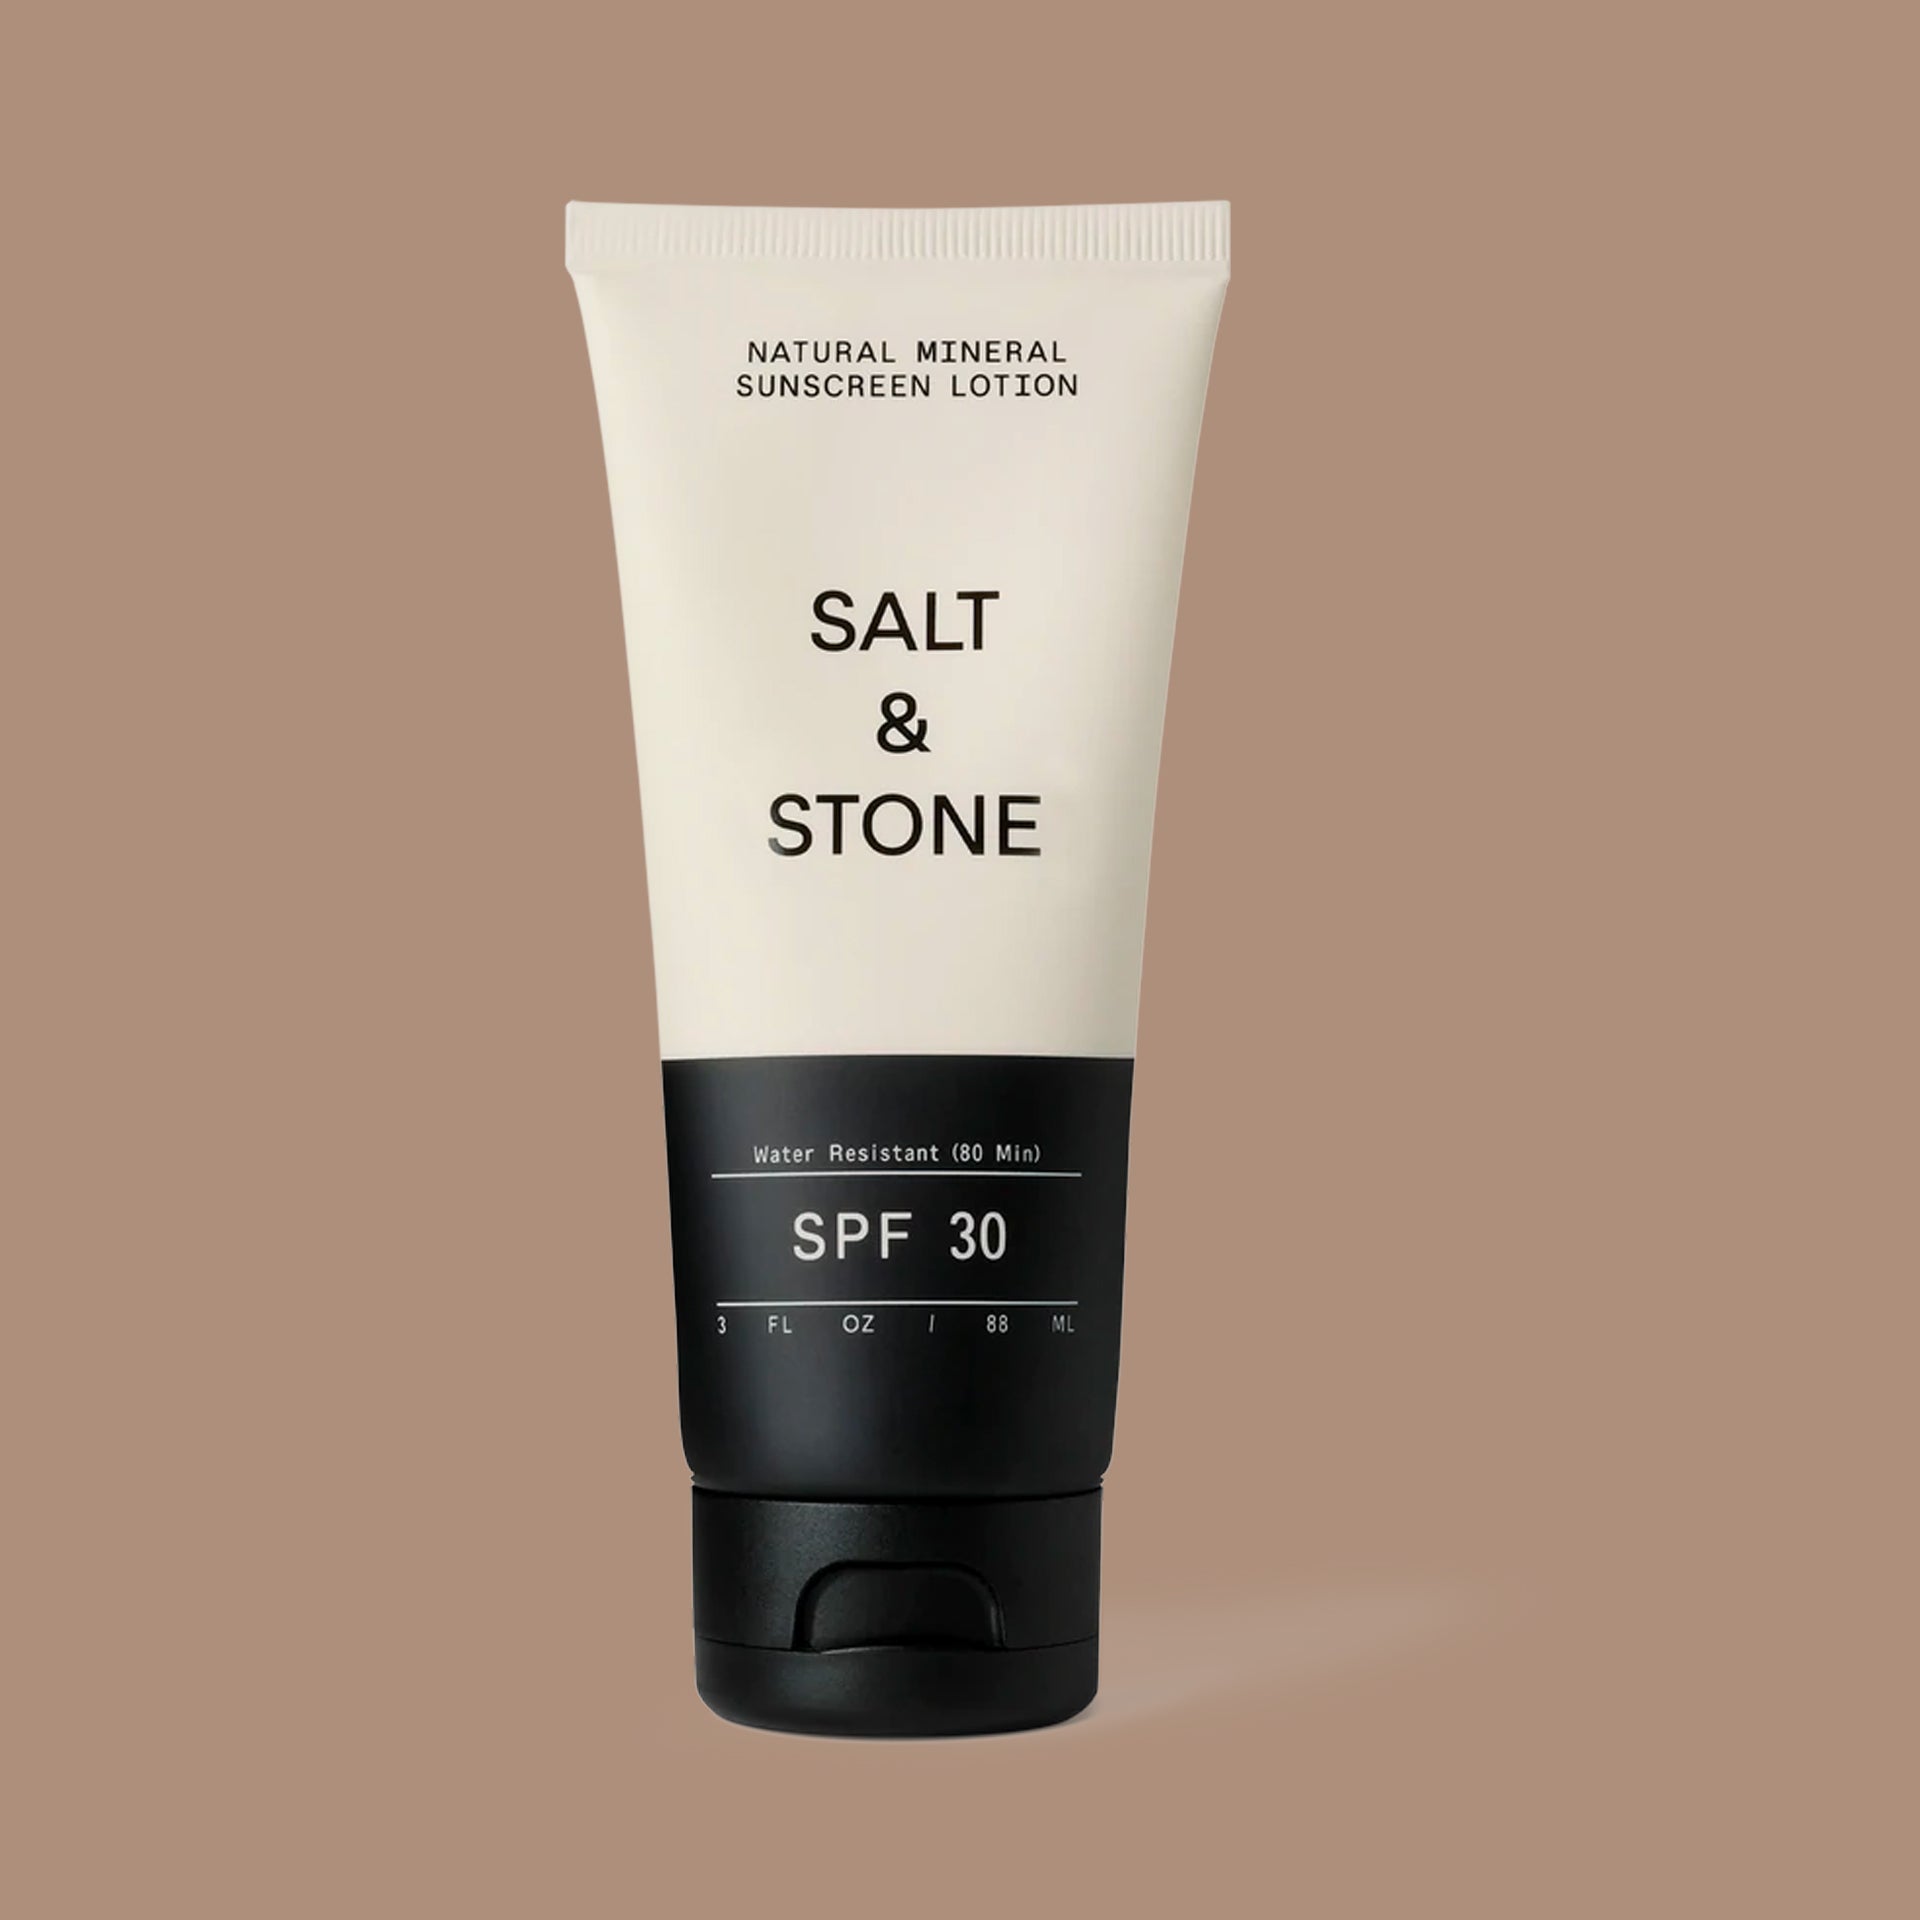 Salt & Stone - Natural Mineral Sunscreen Lotion SPF 30